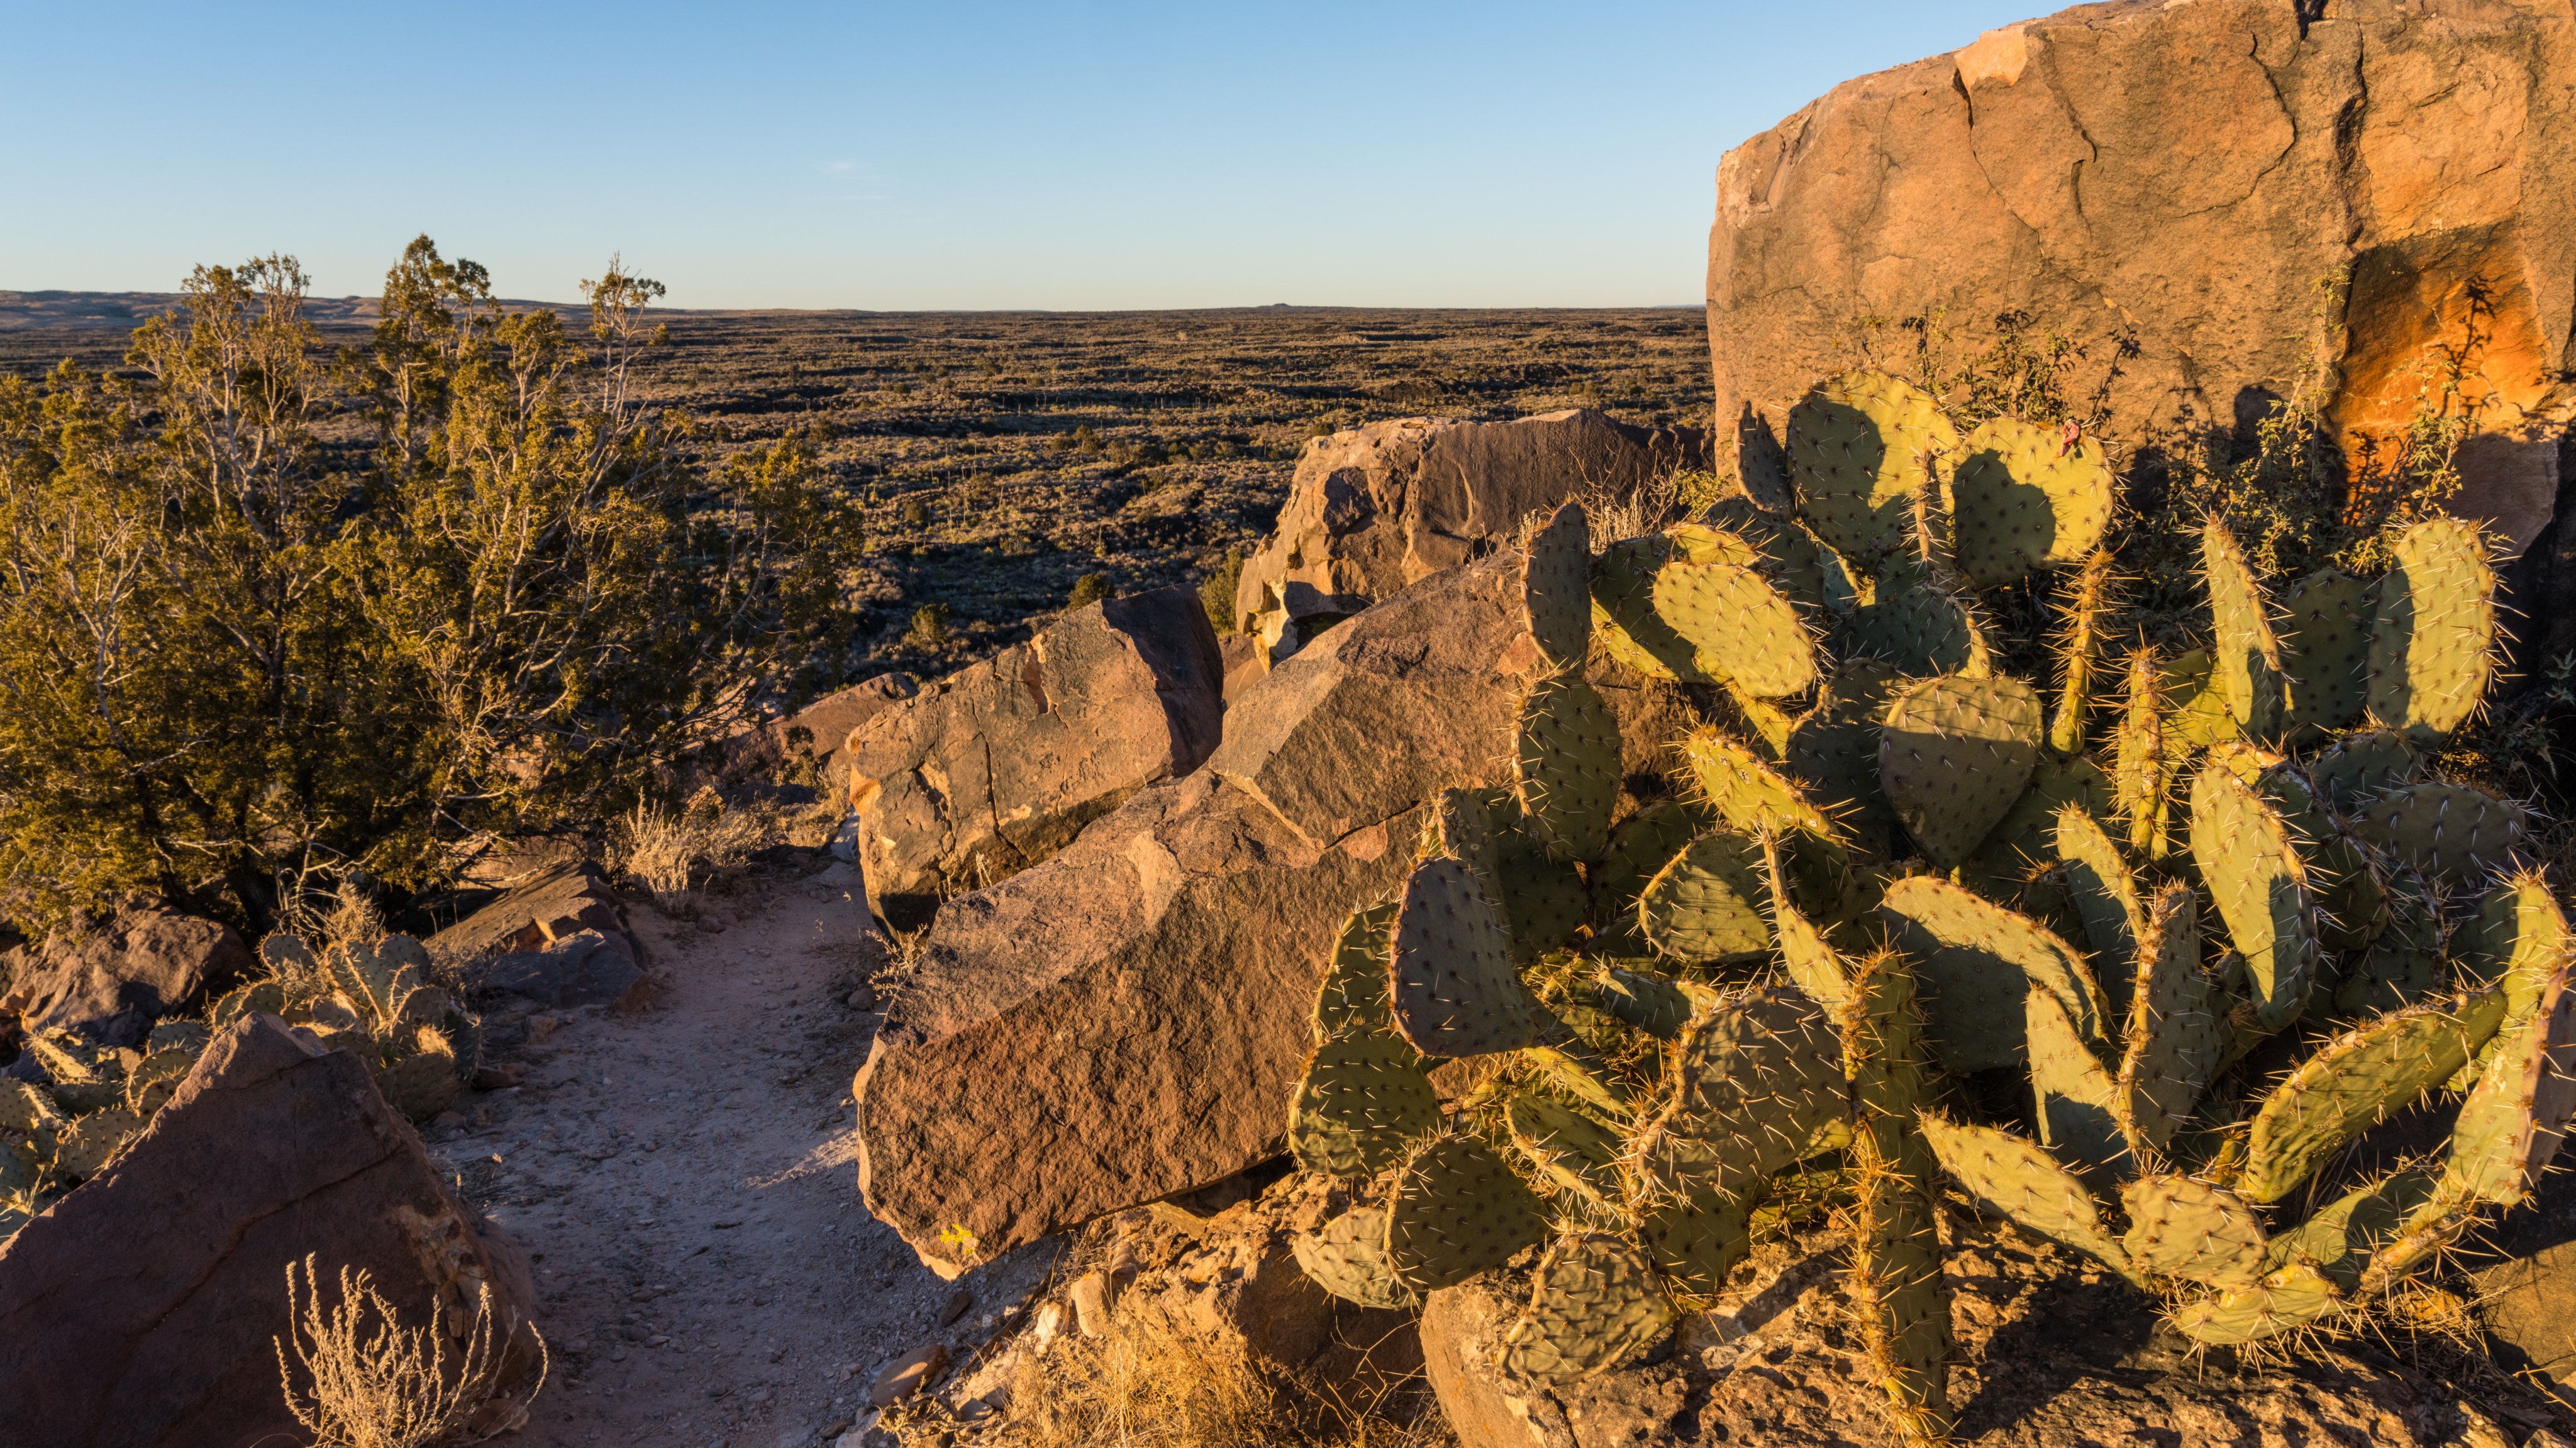 Prickley Pear Cactus among sandstone boulders in the Valley of FIres Recreation Area